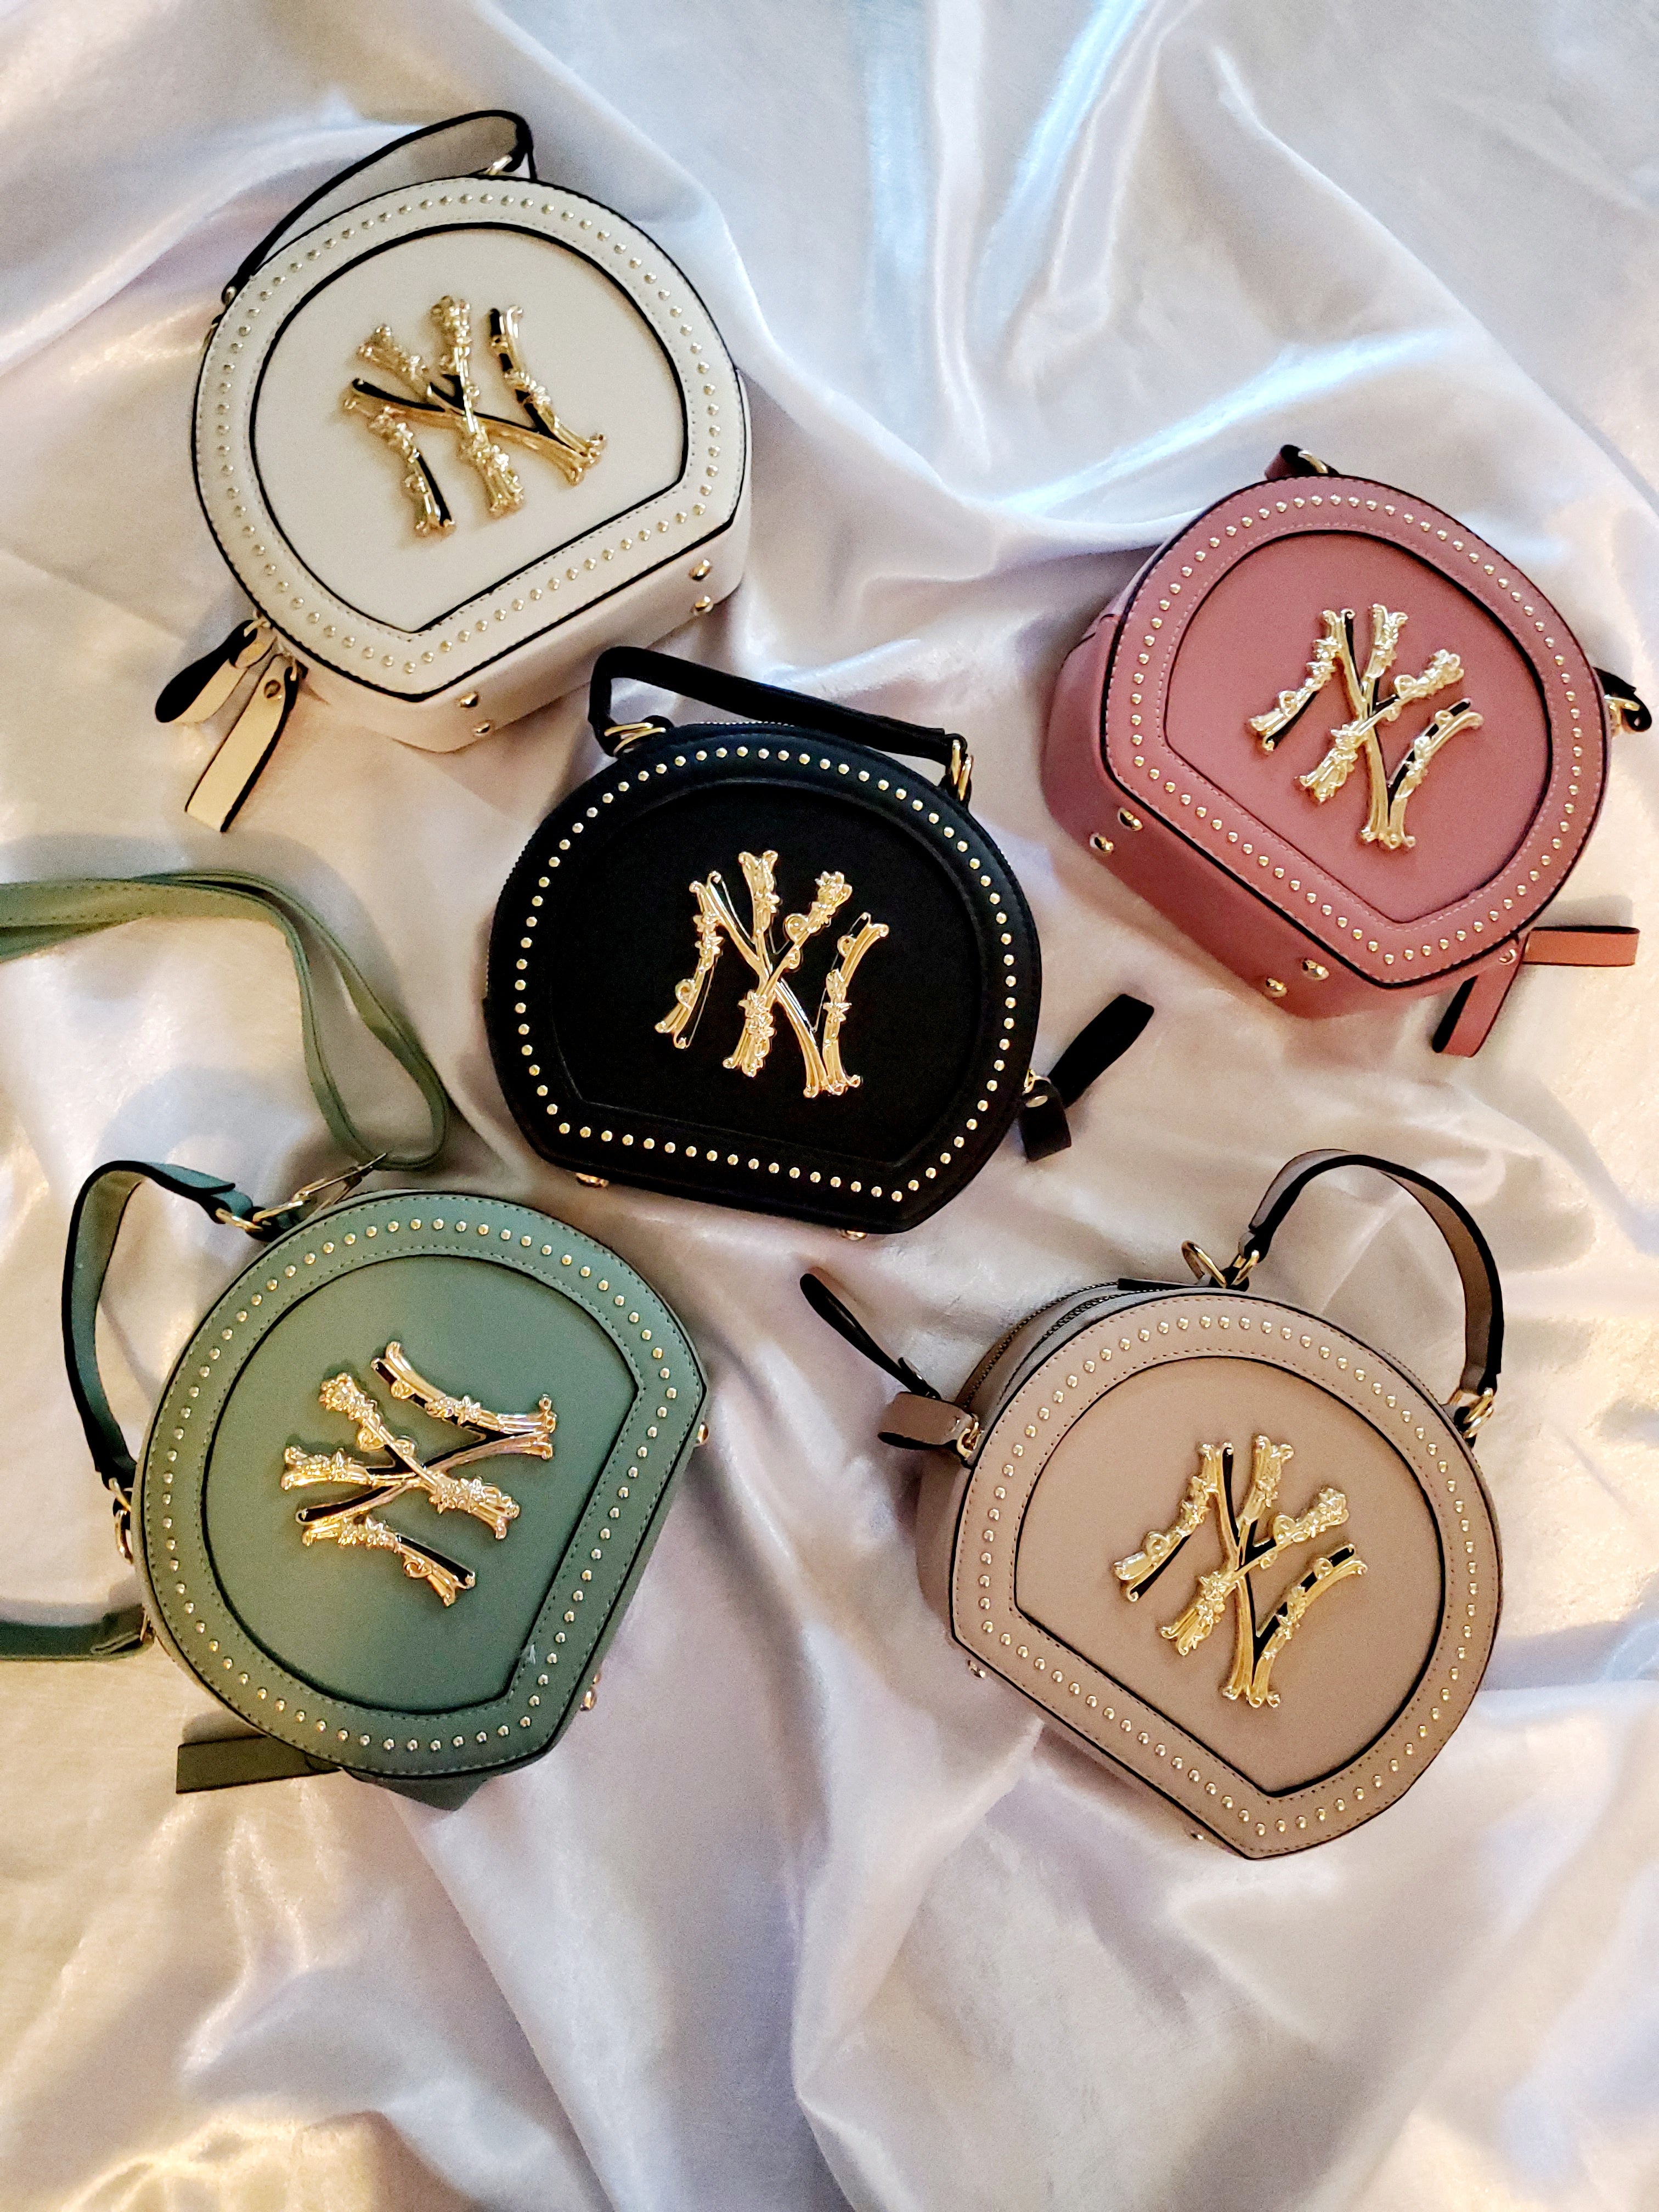 These NY handbags can be worn crossbody, shoulder, or handle PU Leather Don't forget to grab the NY Yankees hat to match!